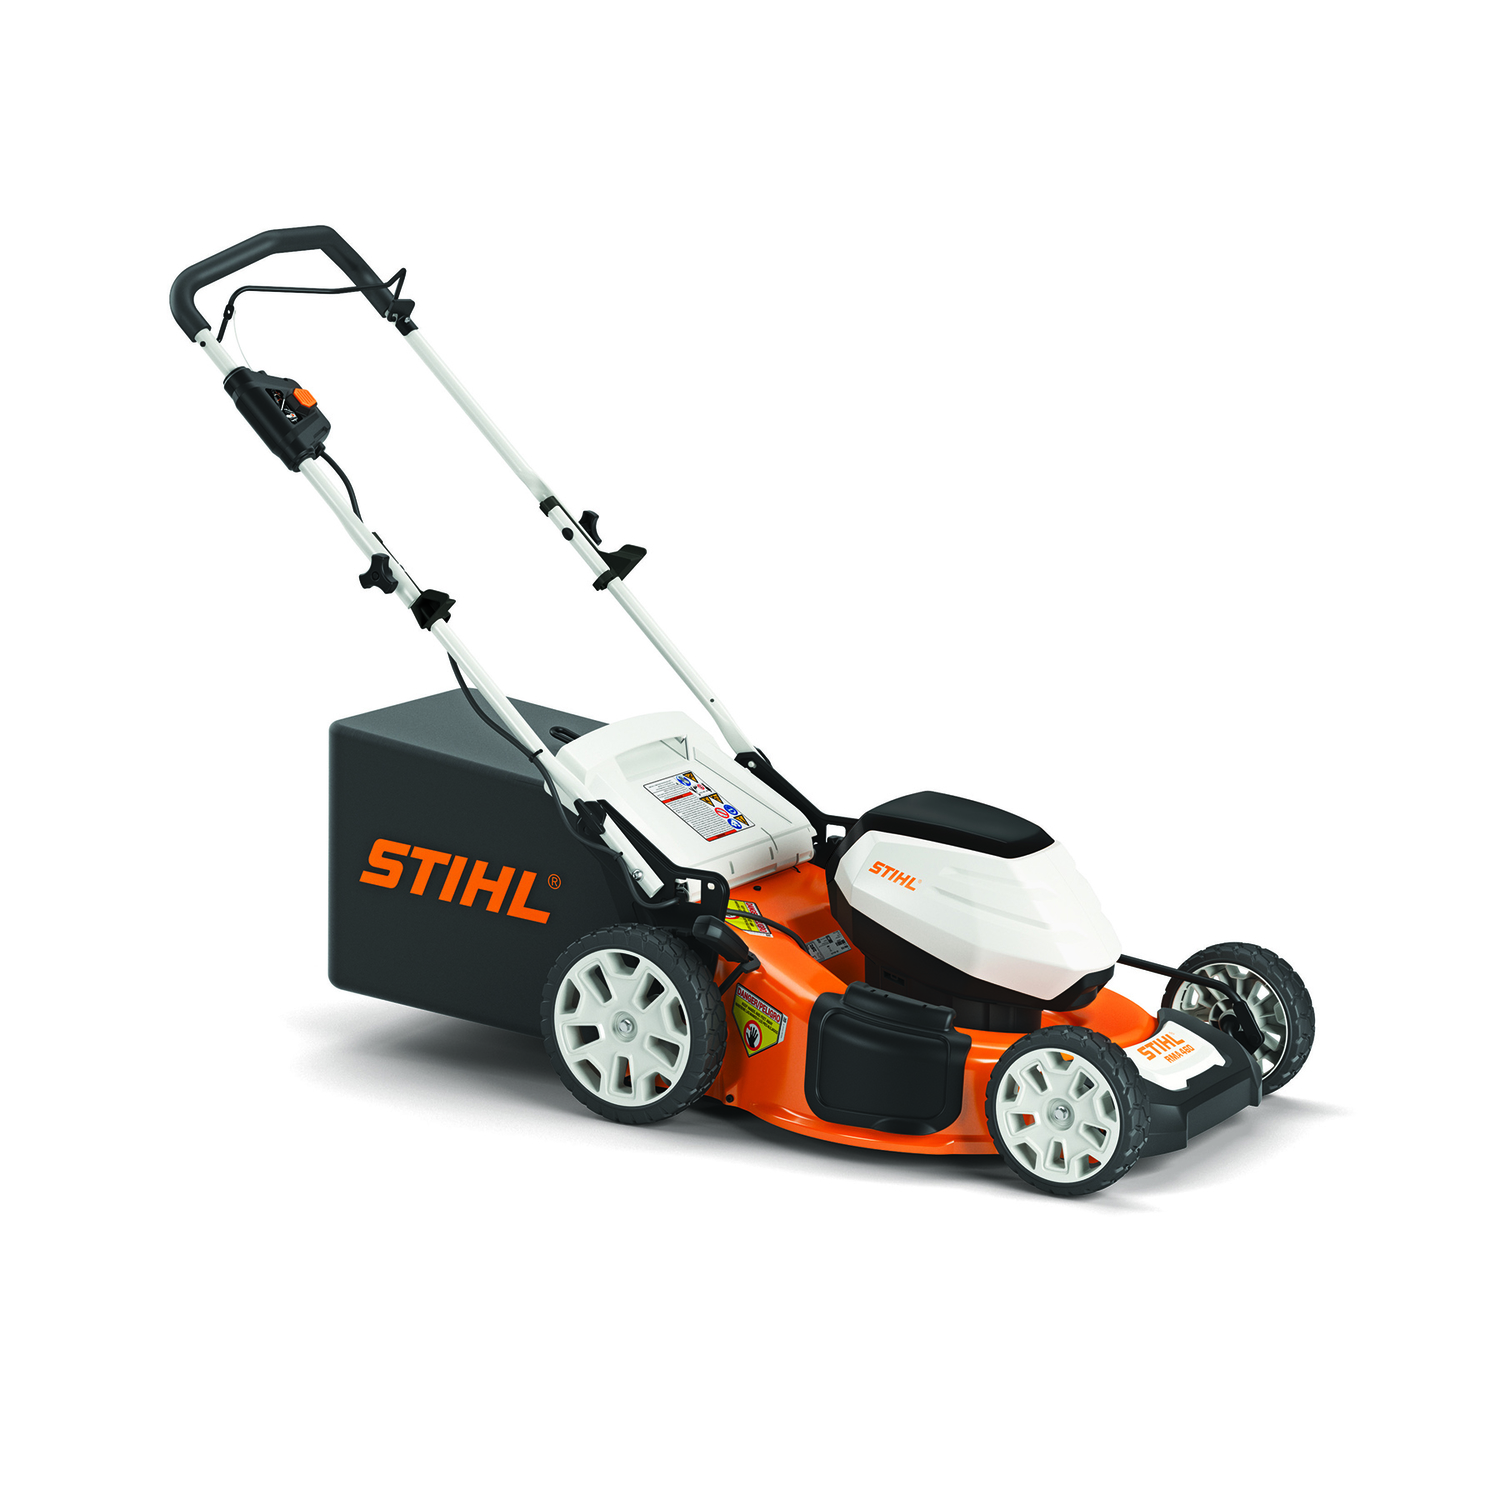 stihl cordless weed trimmer